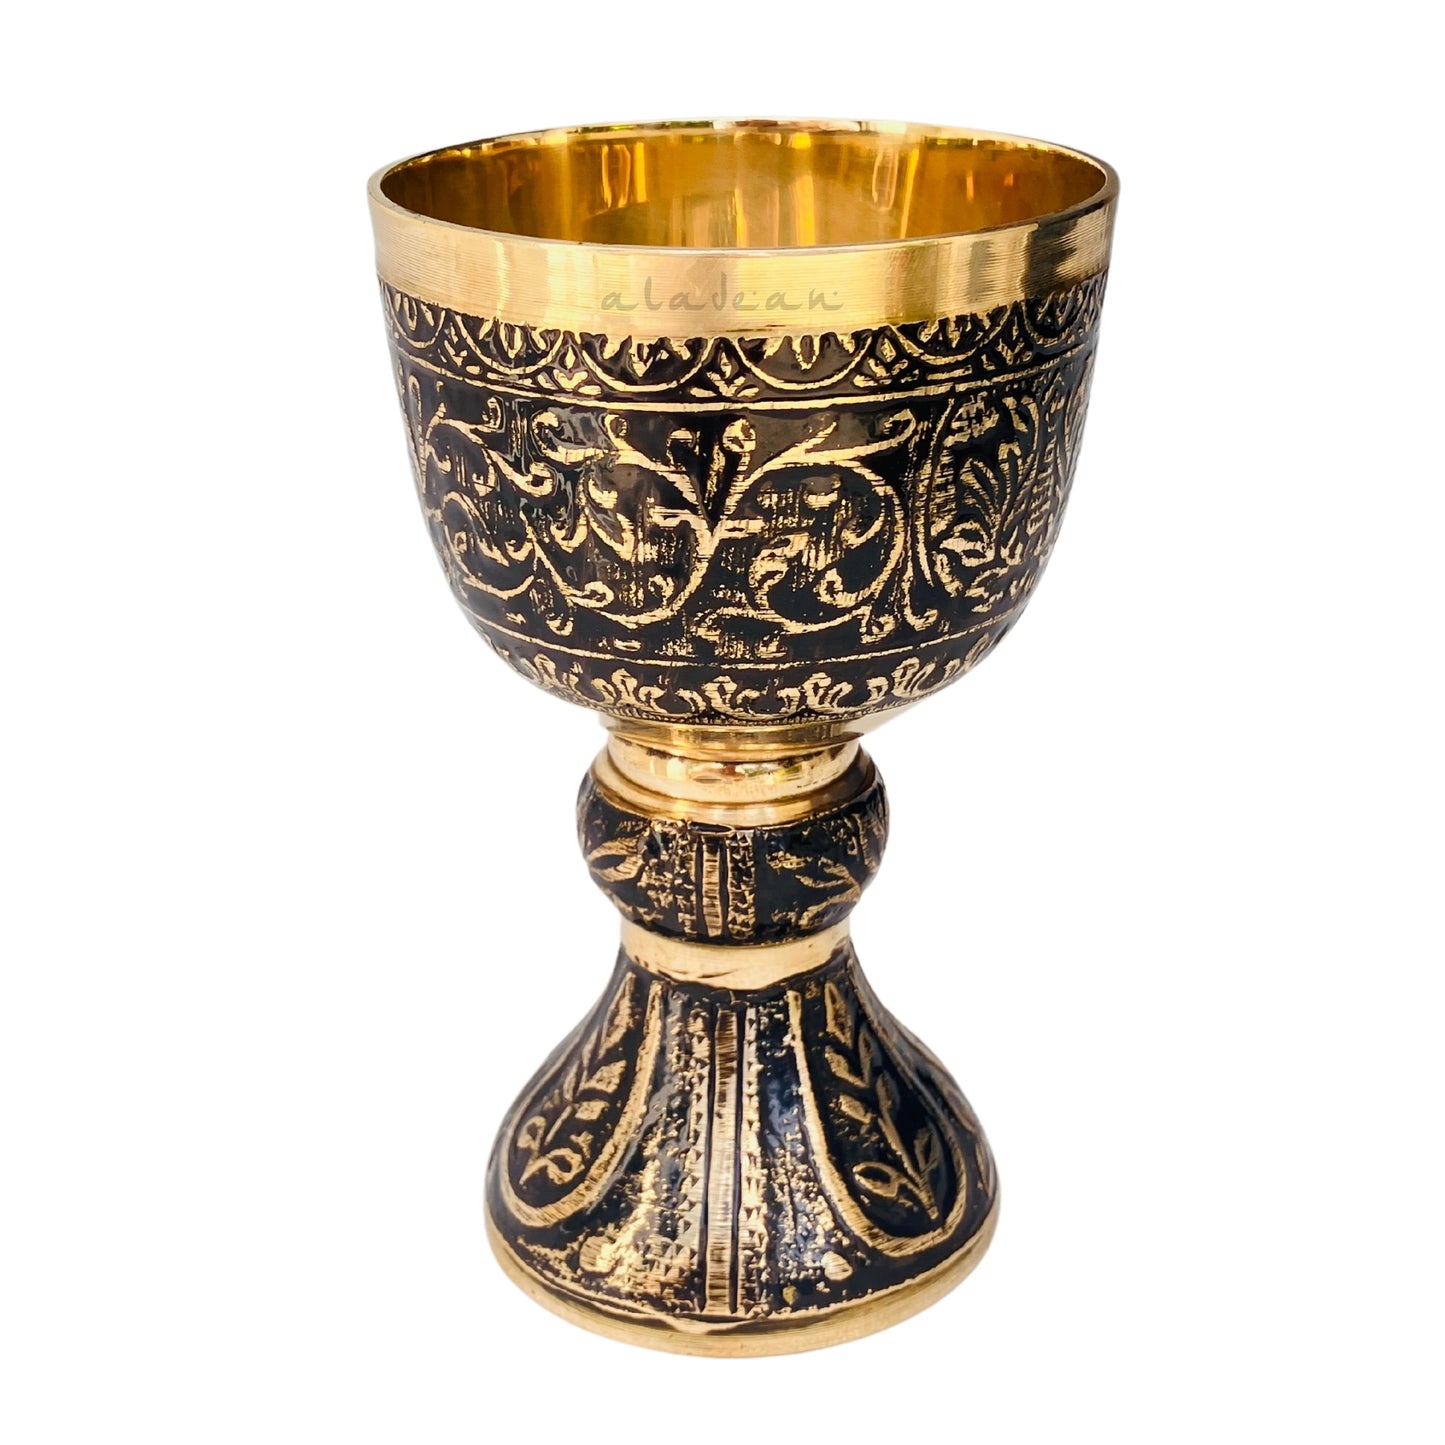 Mediveal Chalice Goblet - Dukes Brass Wine Cup